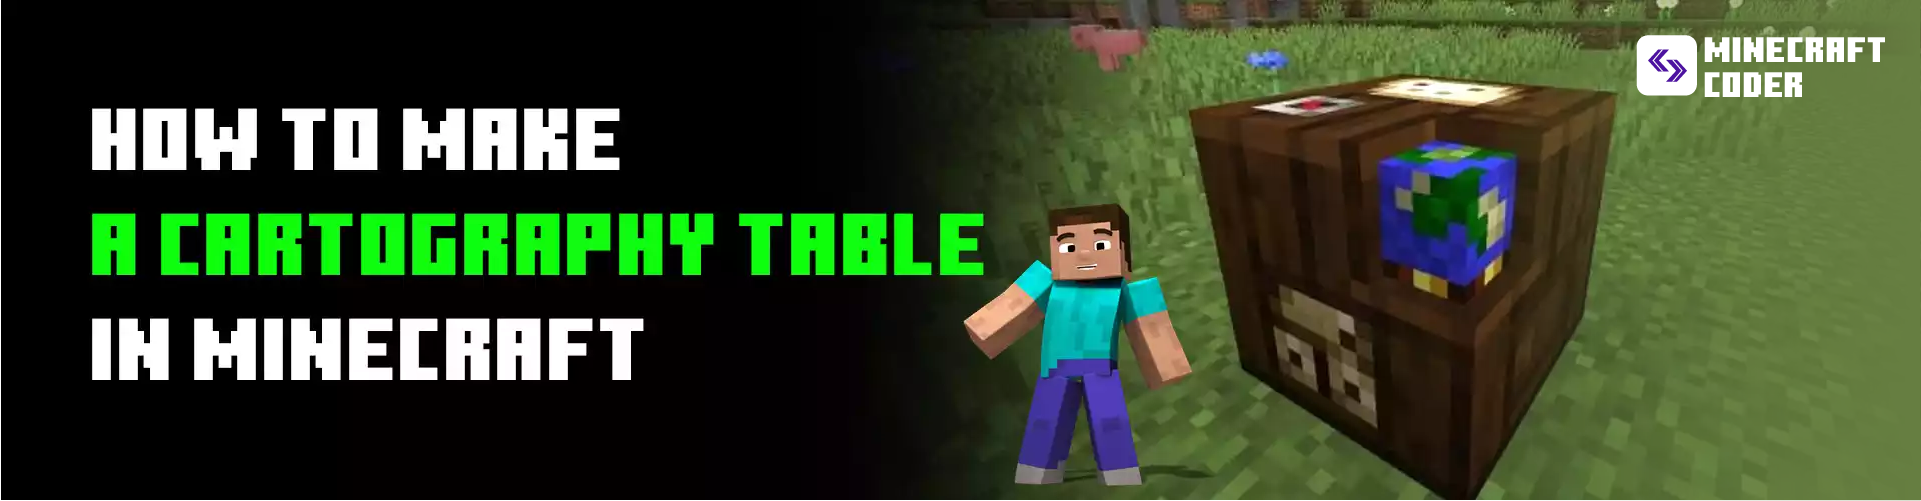 HOW TO MAKE A CARTOGRAPHY TABLE IN MINECRAFT